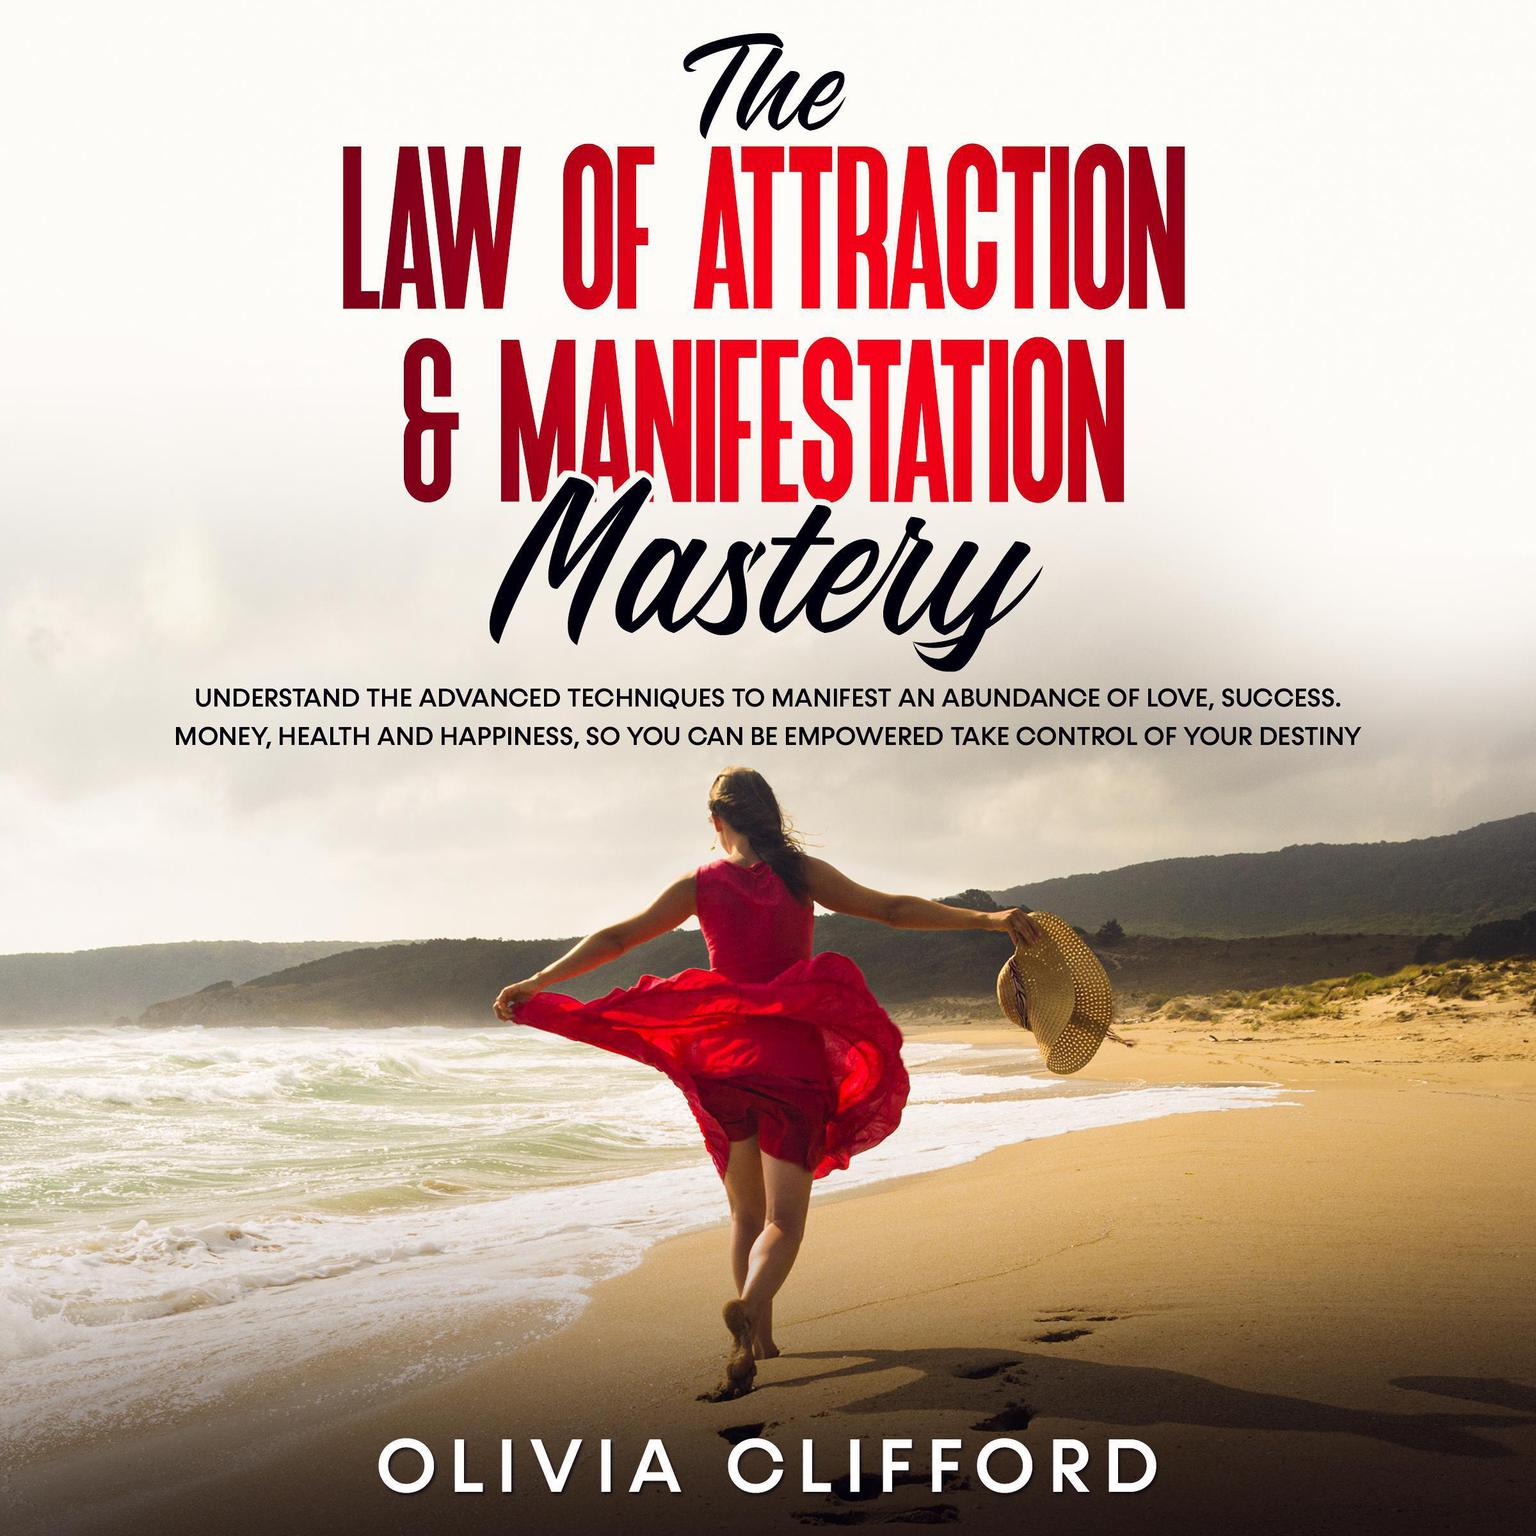 The Law of Attraction & Manifestation Mastery: Understand the Advanced Techniques to Manifest an Abundance of Love, Success, Money, Health and Happiness, so you can be Empowered to Take Control of Your Destiny Audiobook, by Olivia Clifford